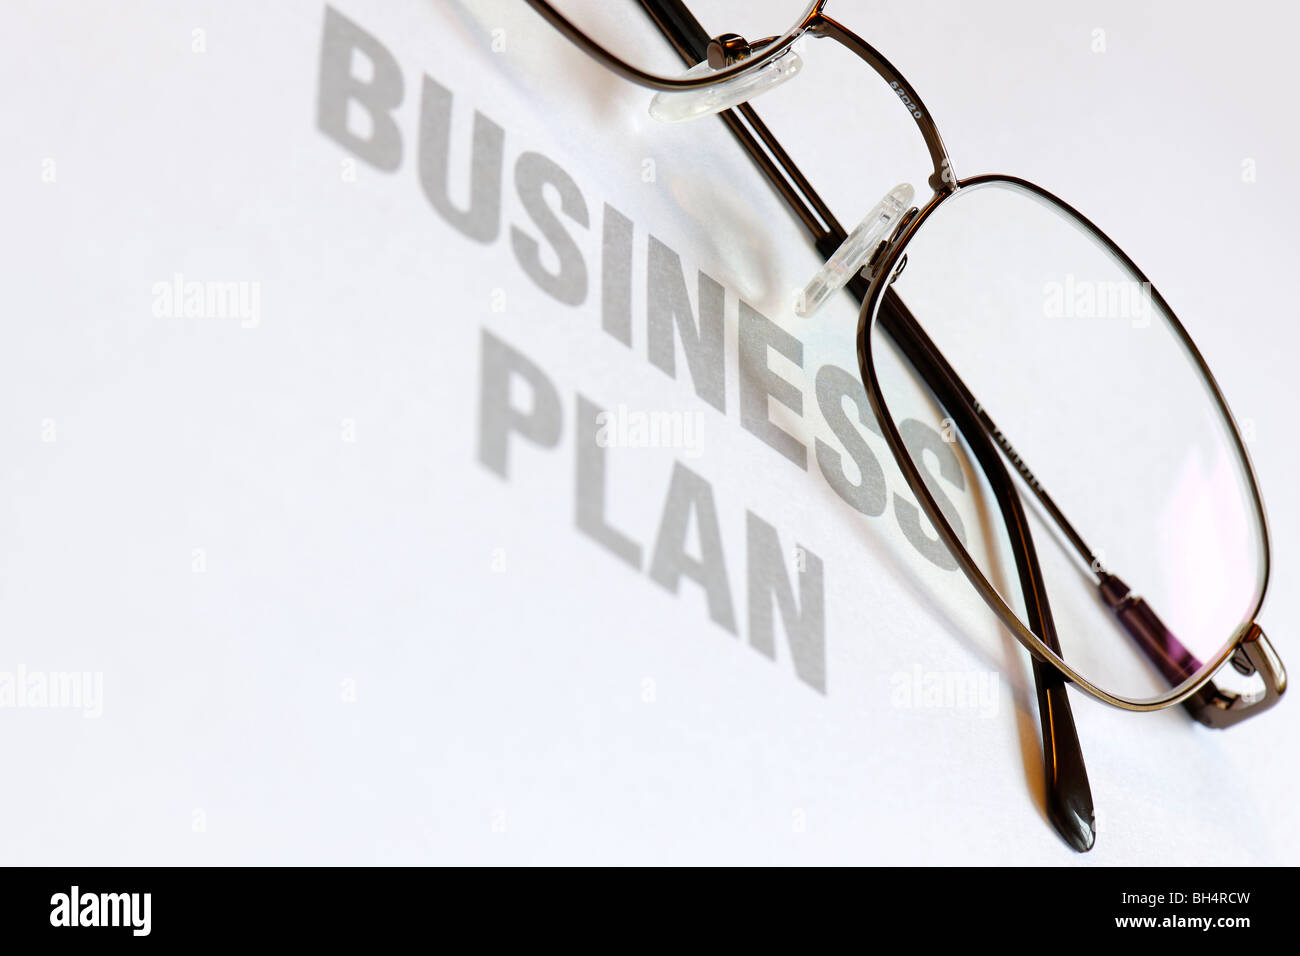 The Business Plan Stock Photo